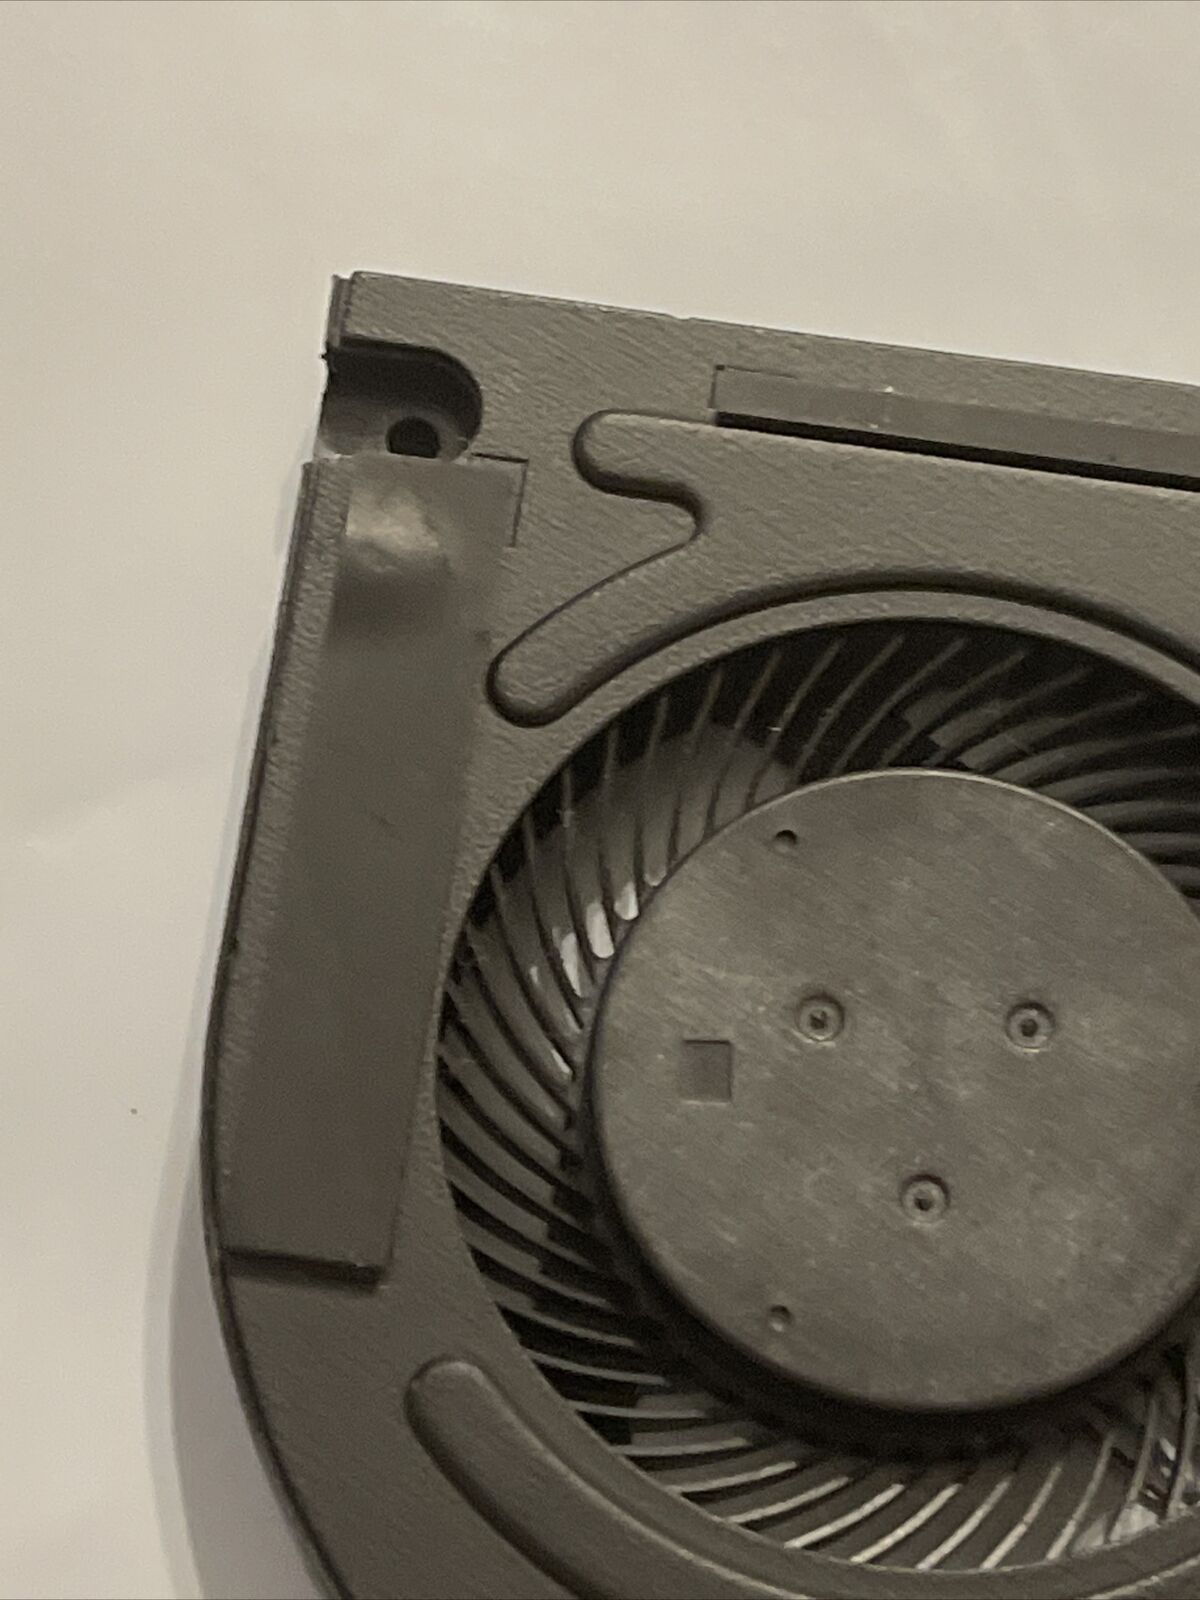 Dell Inspiron Vostro 7500 7501 cooling fan DC5V 0.5A 023.100JS.0021 YND40 0YND40